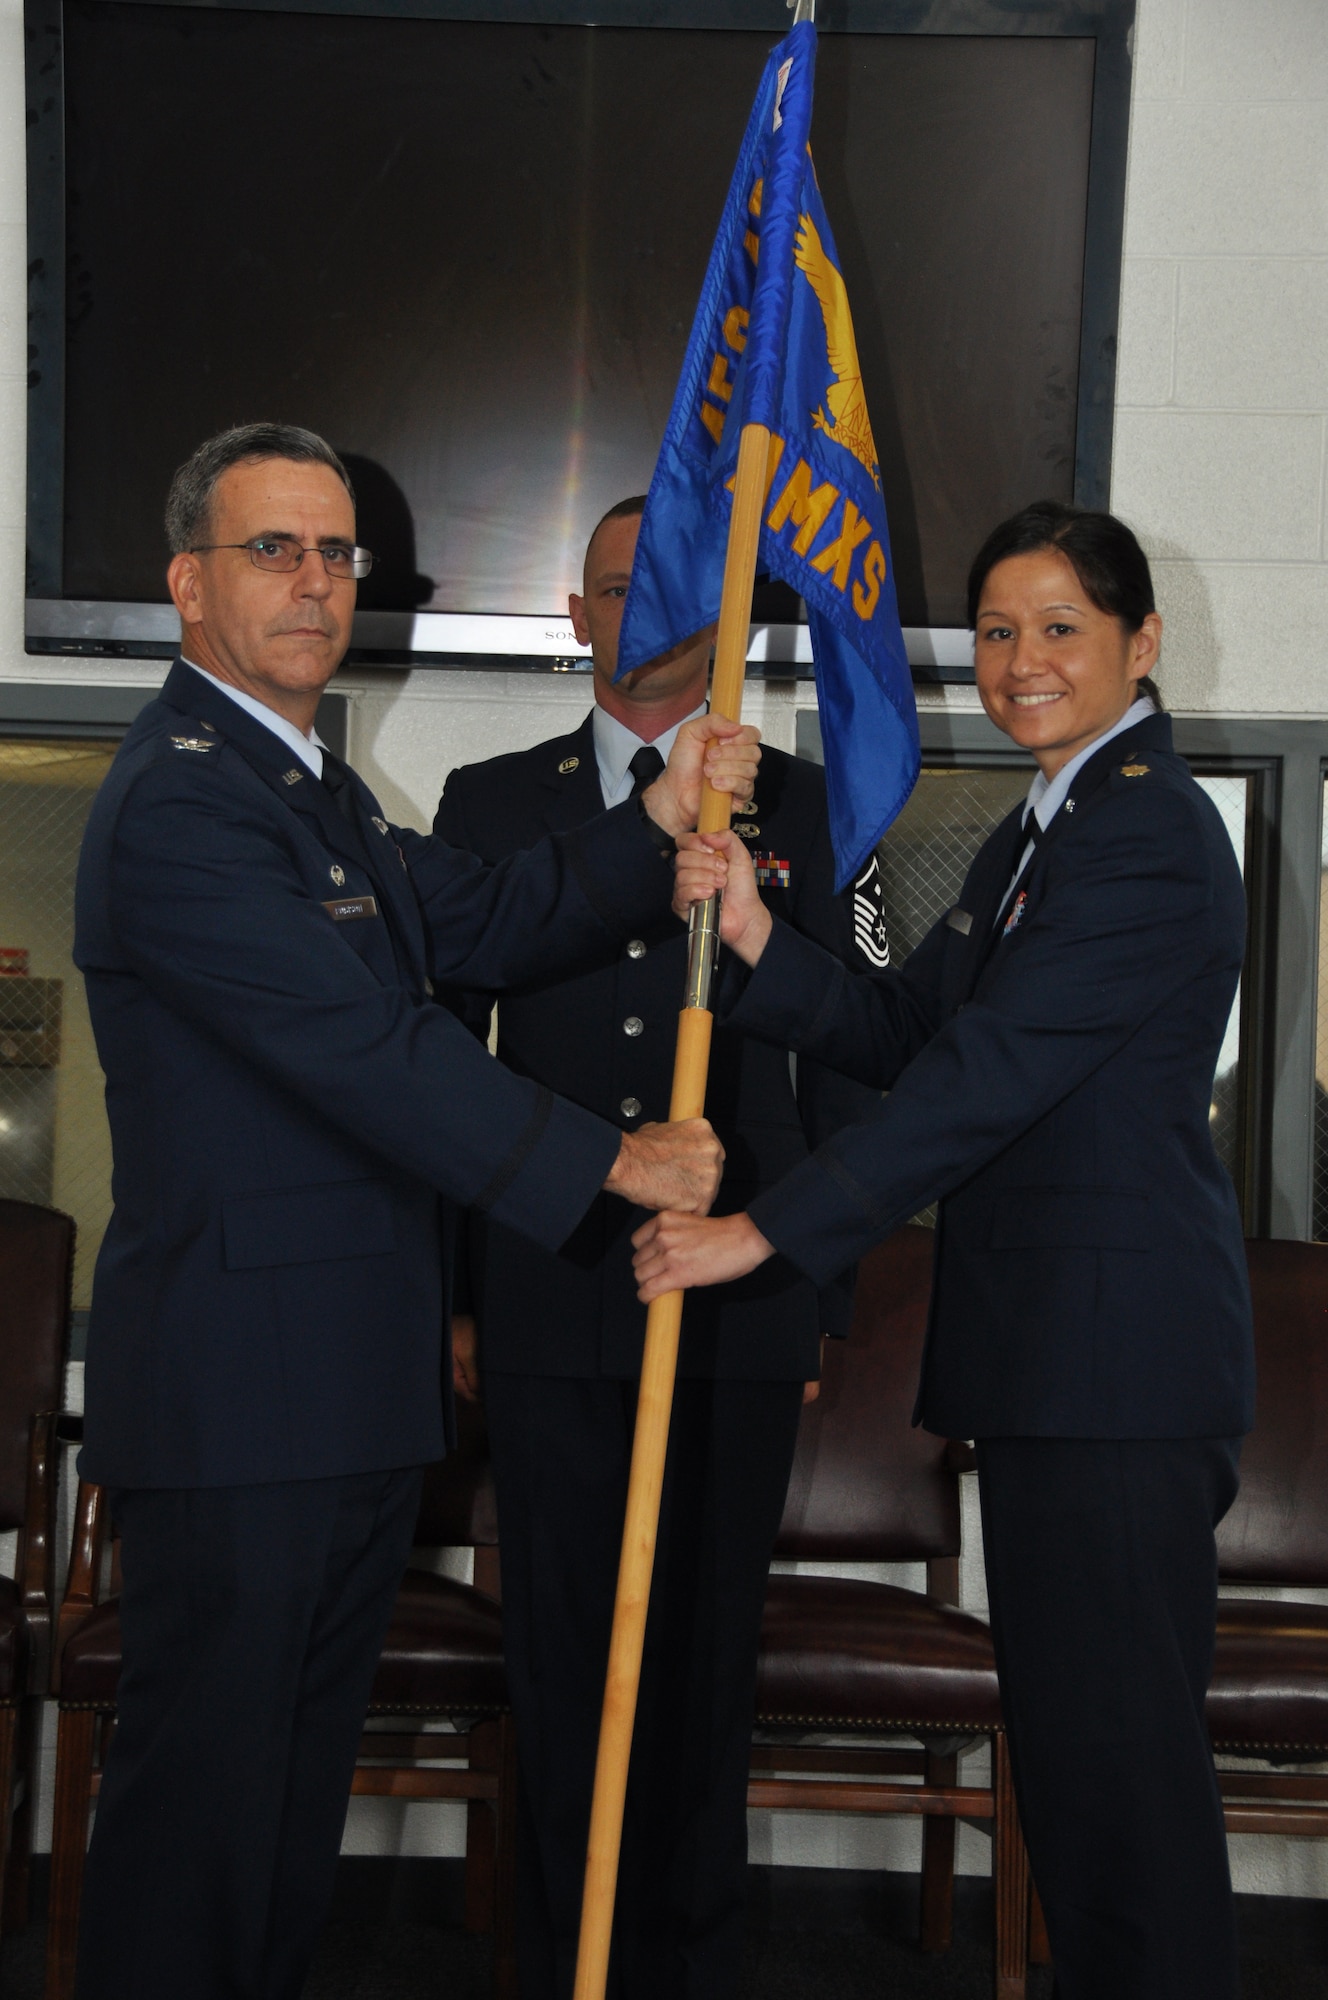 U.S. Air Force Maj. Cynthia Vernier assumes command of the 459th Aircraft Maintenance Squadron from U.S. Air Force Col. Donald Robison, 459th Maintenance Group commander, in a change of command ceremony at Joint Base Andrews, Md., July 13, 2013. Vernier was previously the 44th Maintenance Squadron commander at Holloman Air Force Base, N.M., before arriving at the 459 AMXS as a maintenance officer in April of 2013. (U.S. Air Force photo by Staff Sgt. Brent A. Skeen)